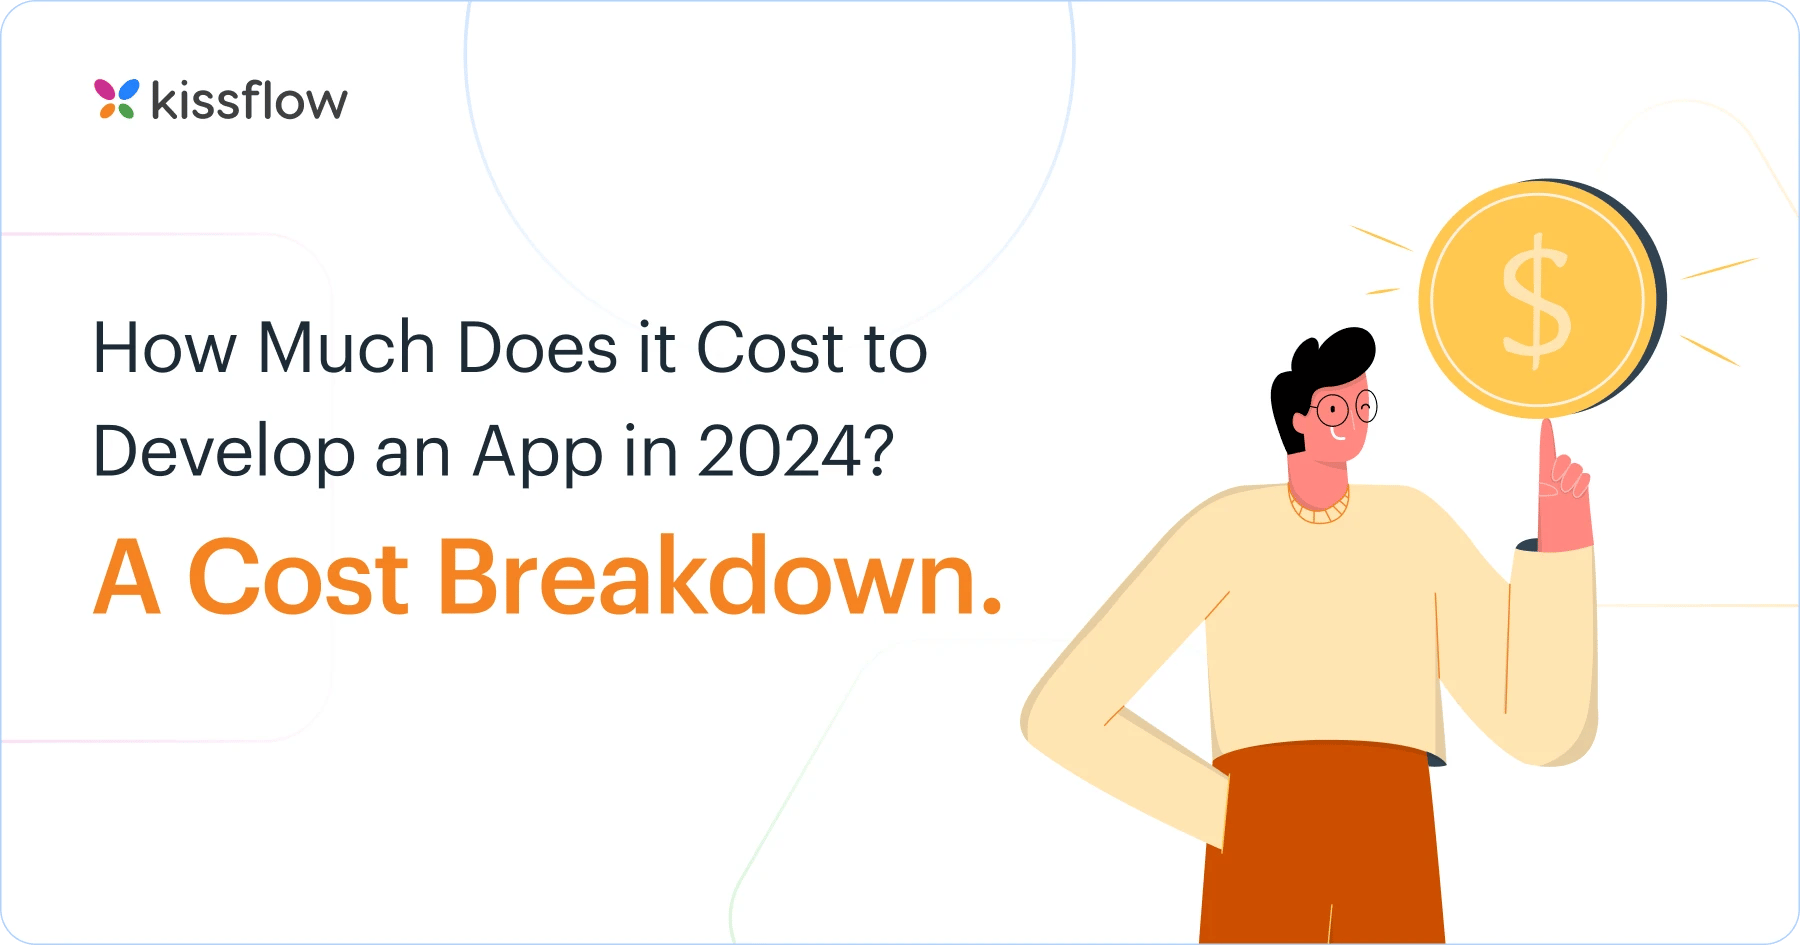 how_much_does_it_cost_to_develop_an_app_in_2024_OG